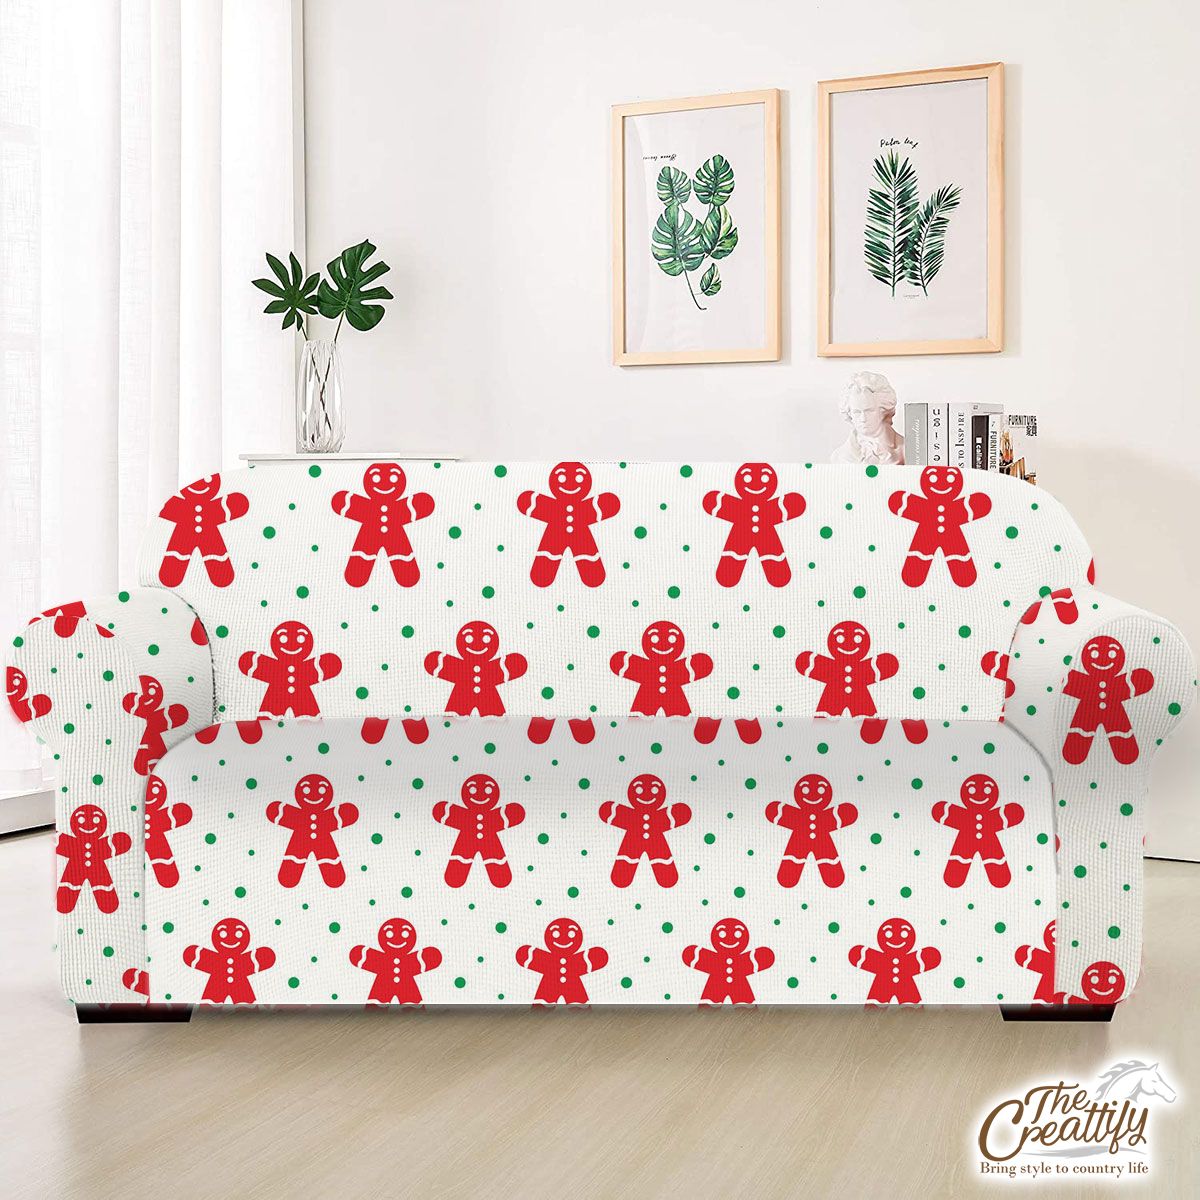 Gingerbread Man Cookies, Christmas Gingerbread Red With Snowflake Background Sofa Cover